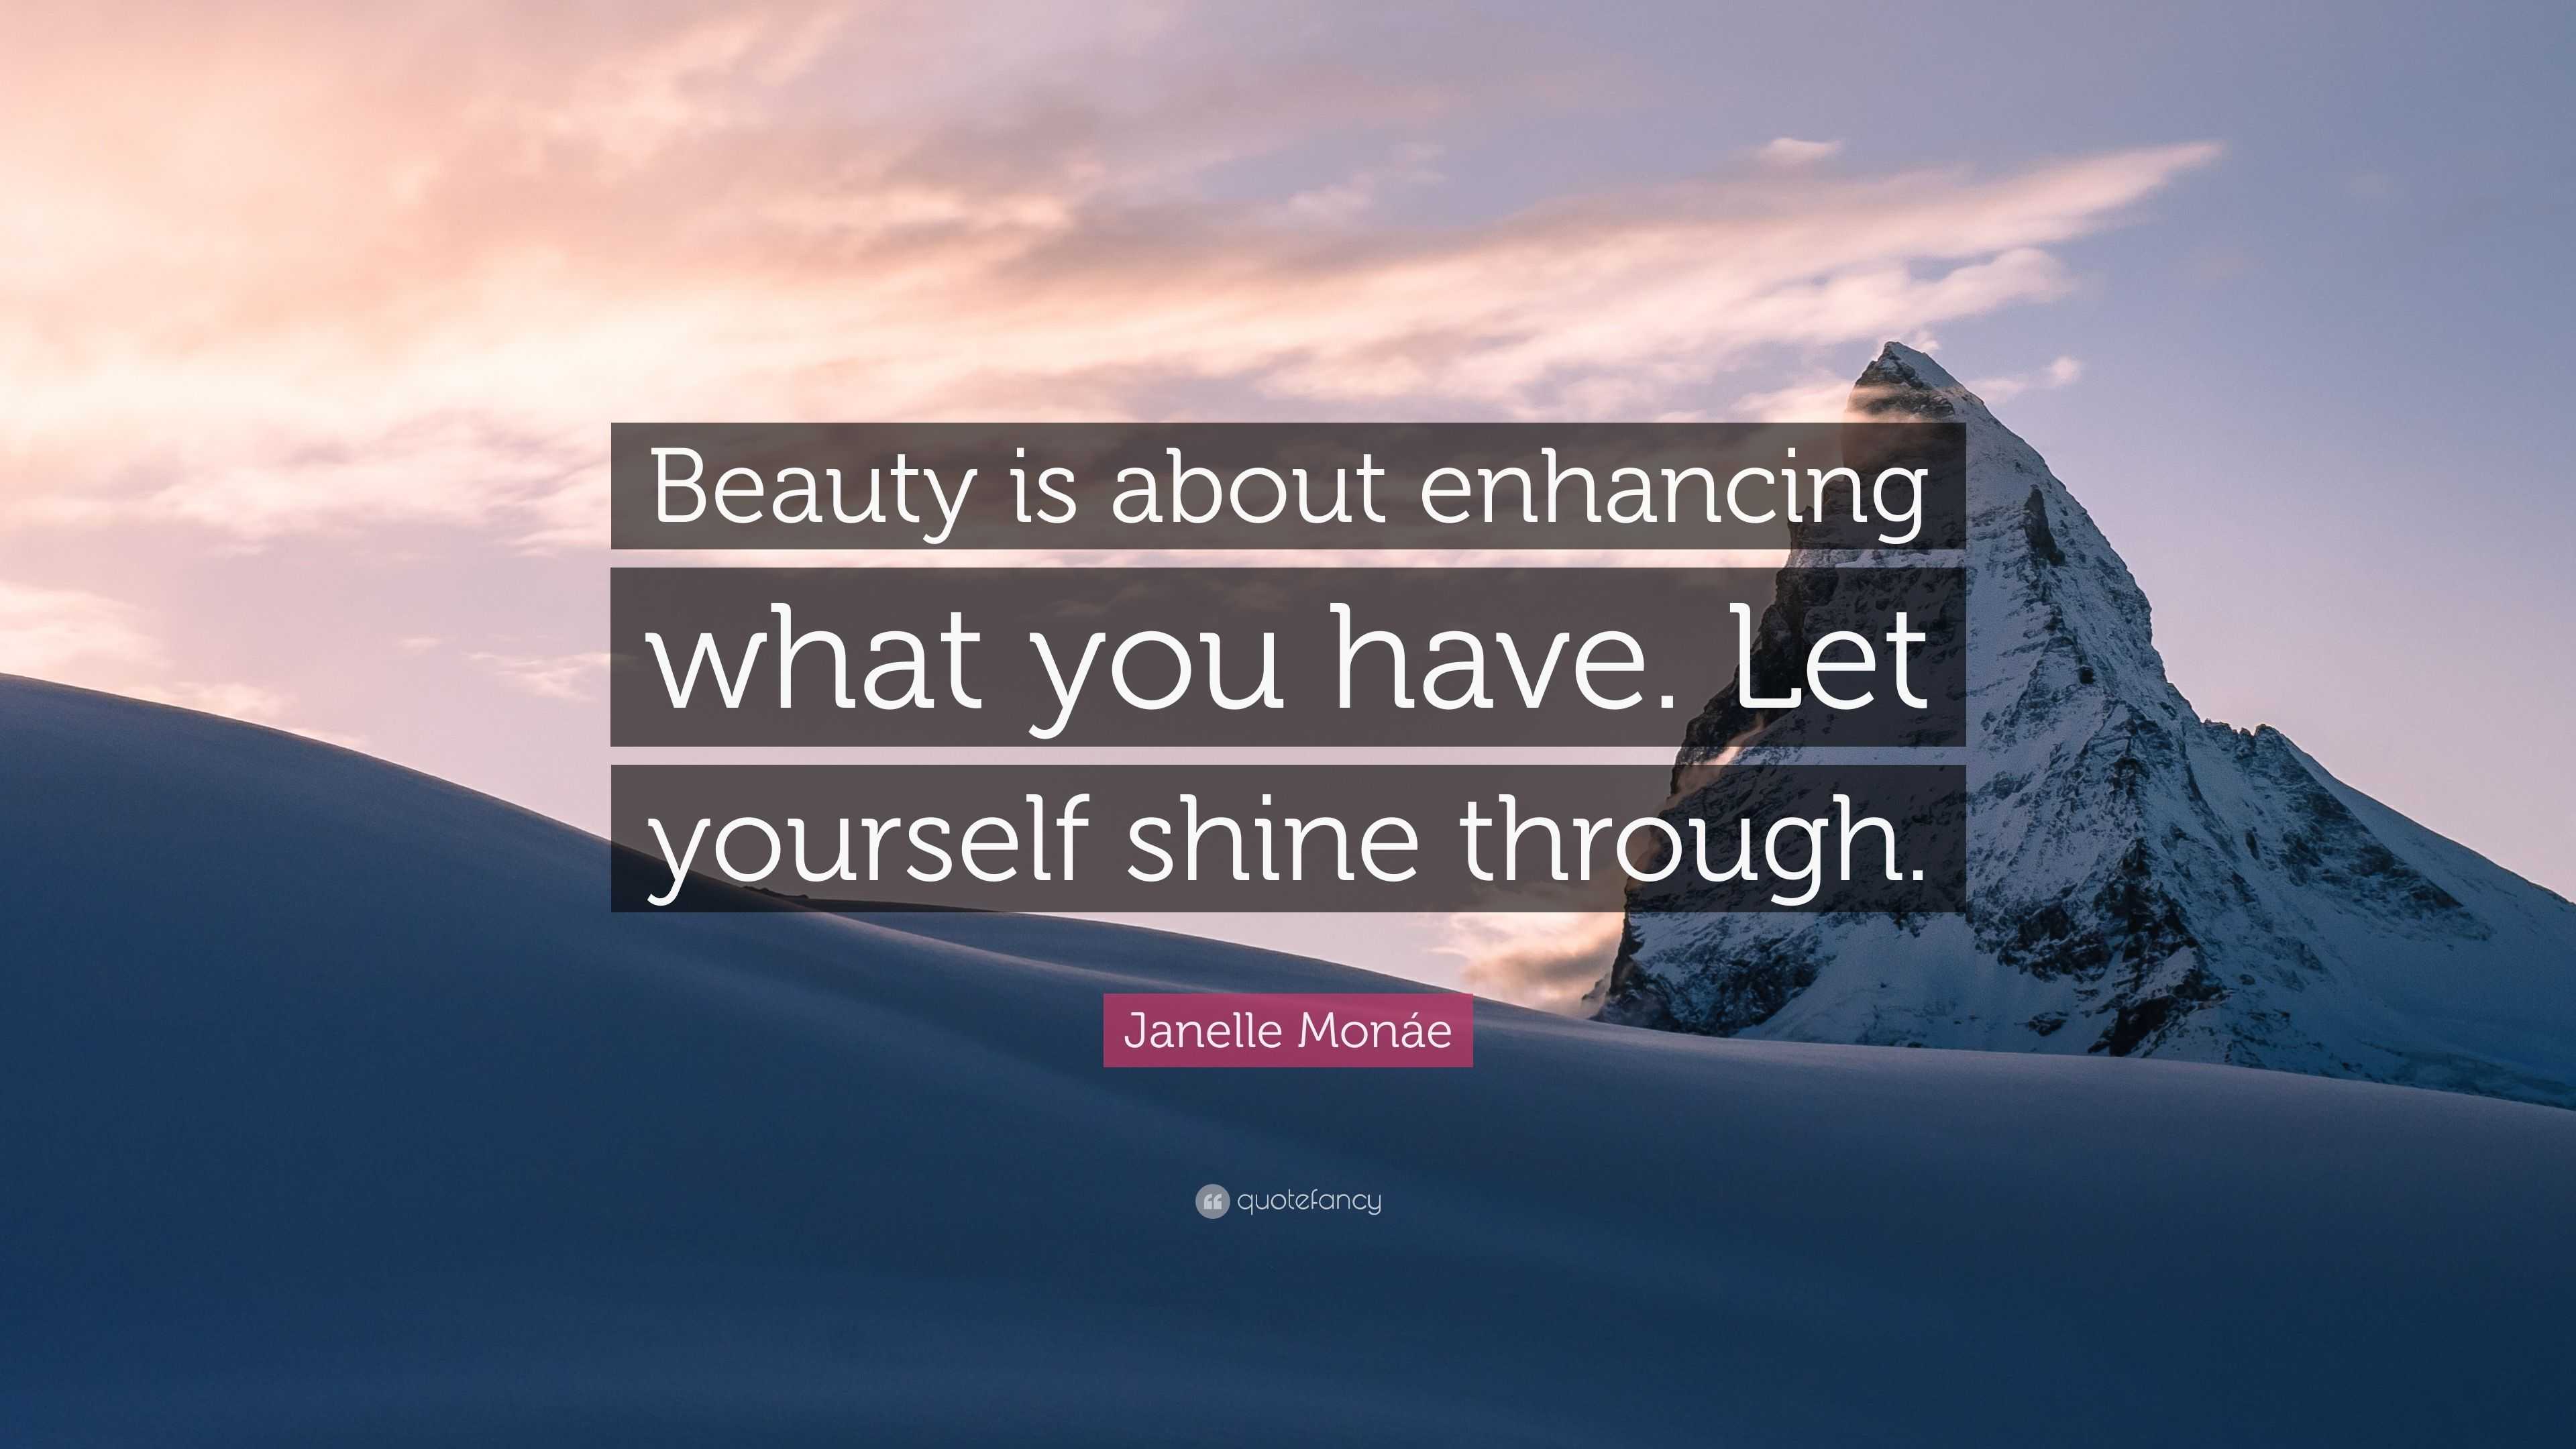 Janelle Monáe Quote: “Beauty is about enhancing what you have. Let